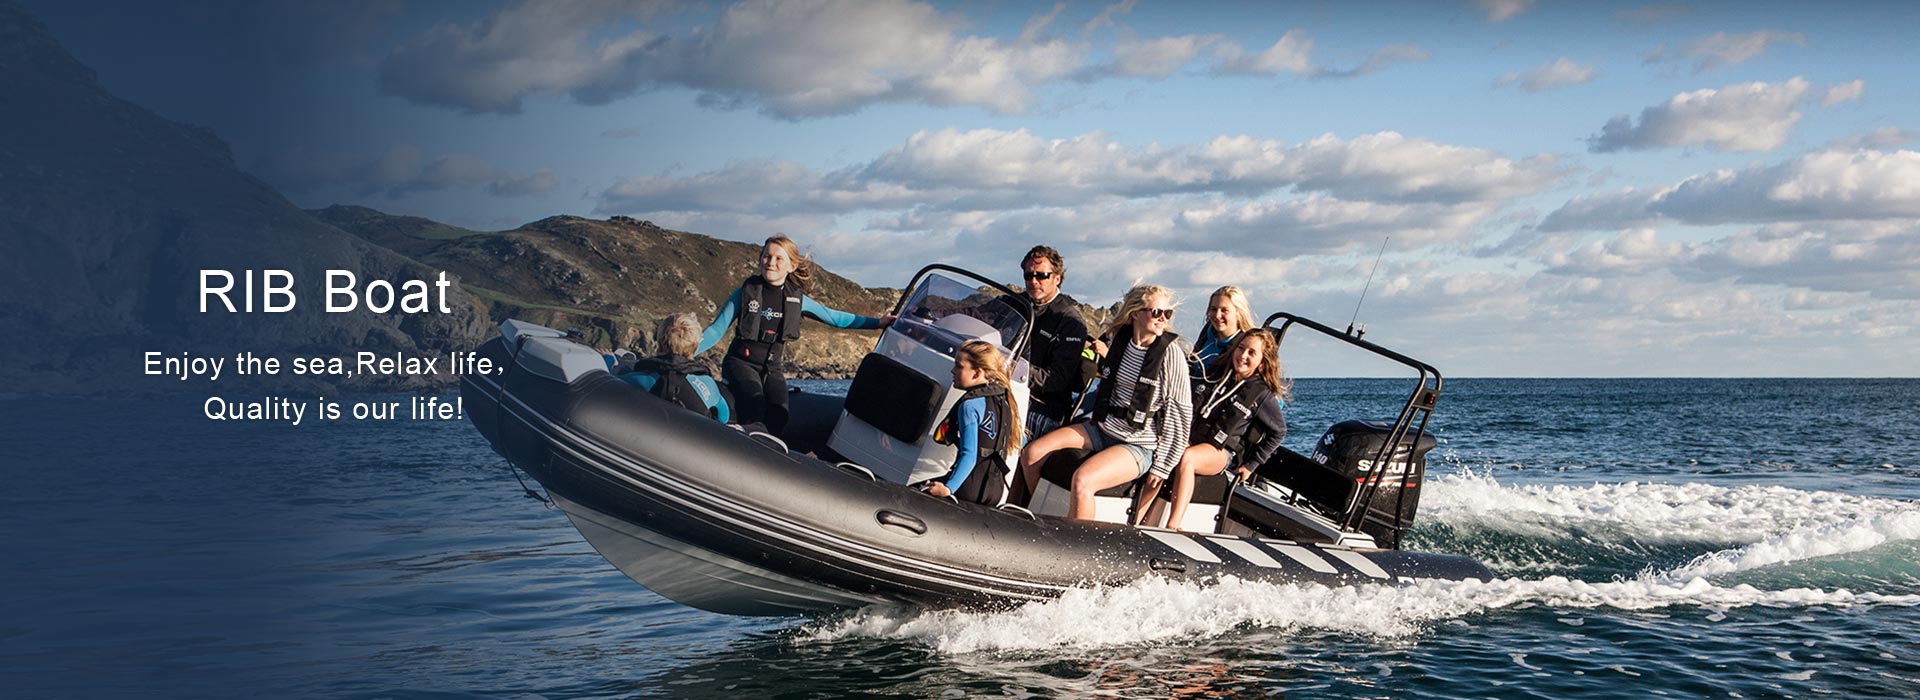 High-Quality Custom RIB Boat with Affordable Price and Excellent Customer Feedback